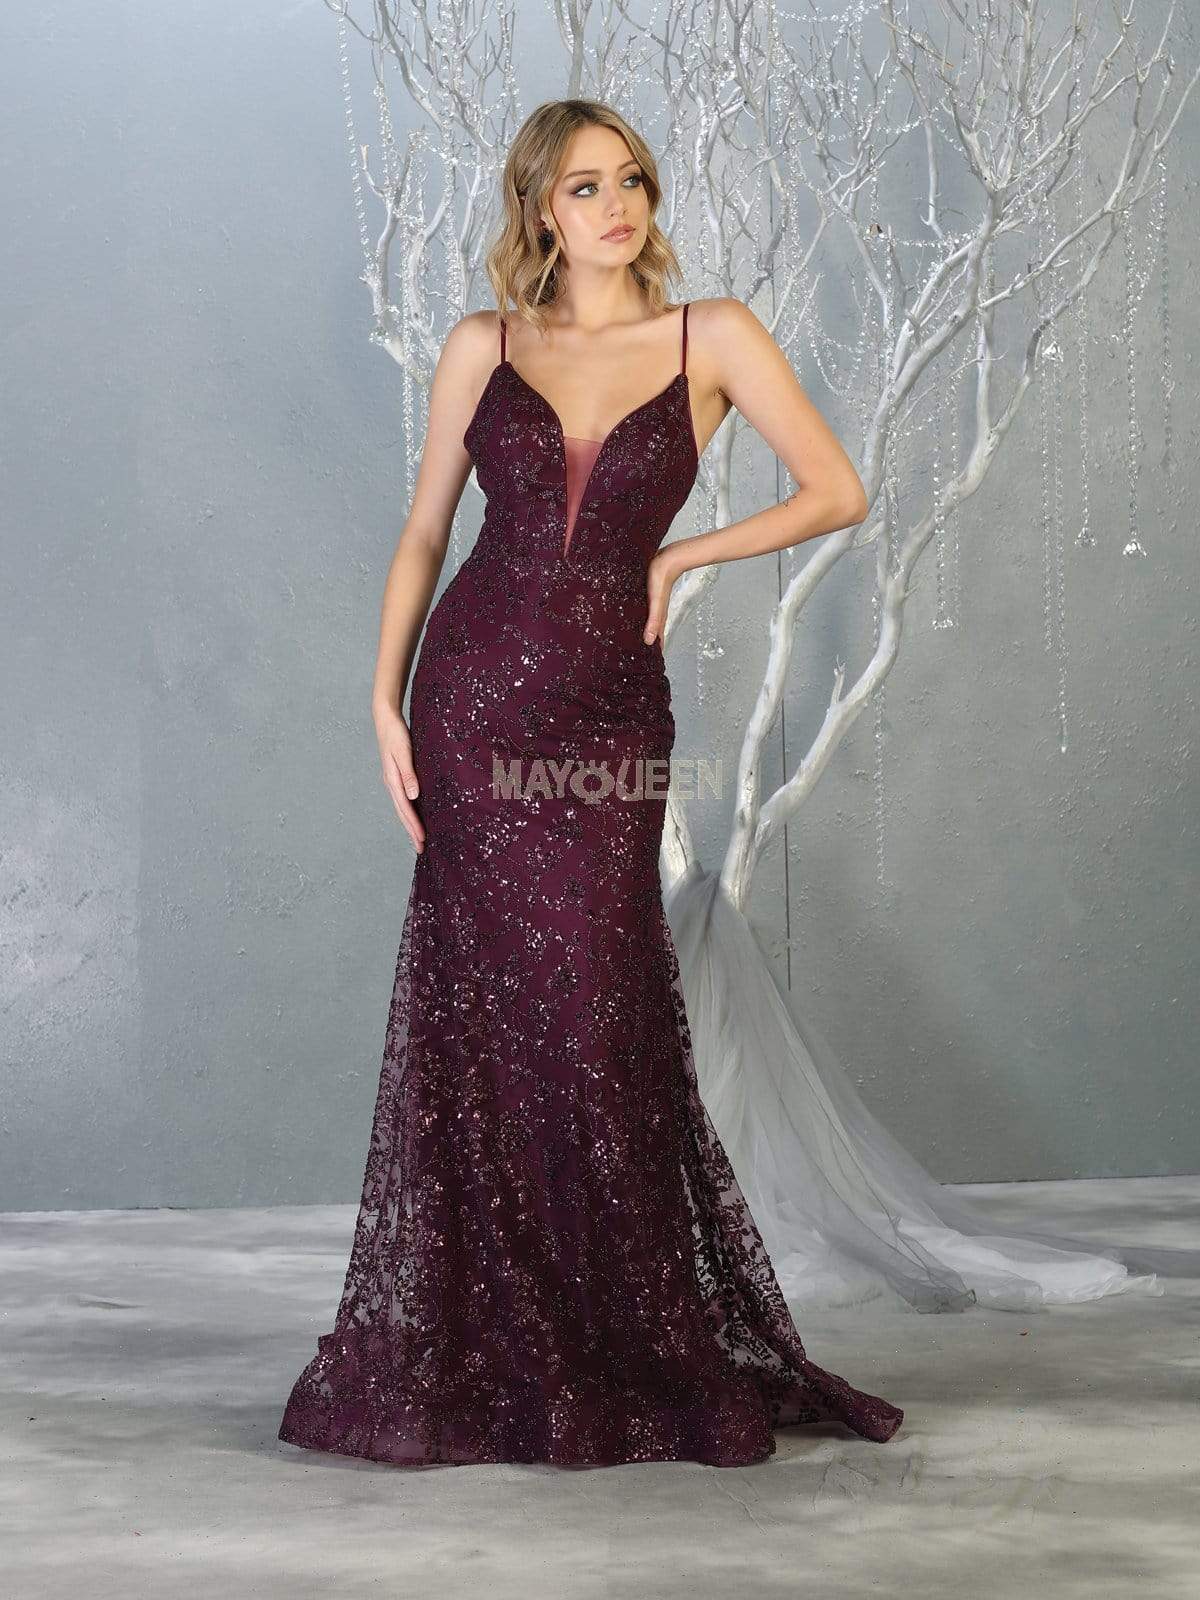 May Queen - MQ1752 Bead Embellished Plunging V-Neck Dress Prom Dresses 4 / Eggplant